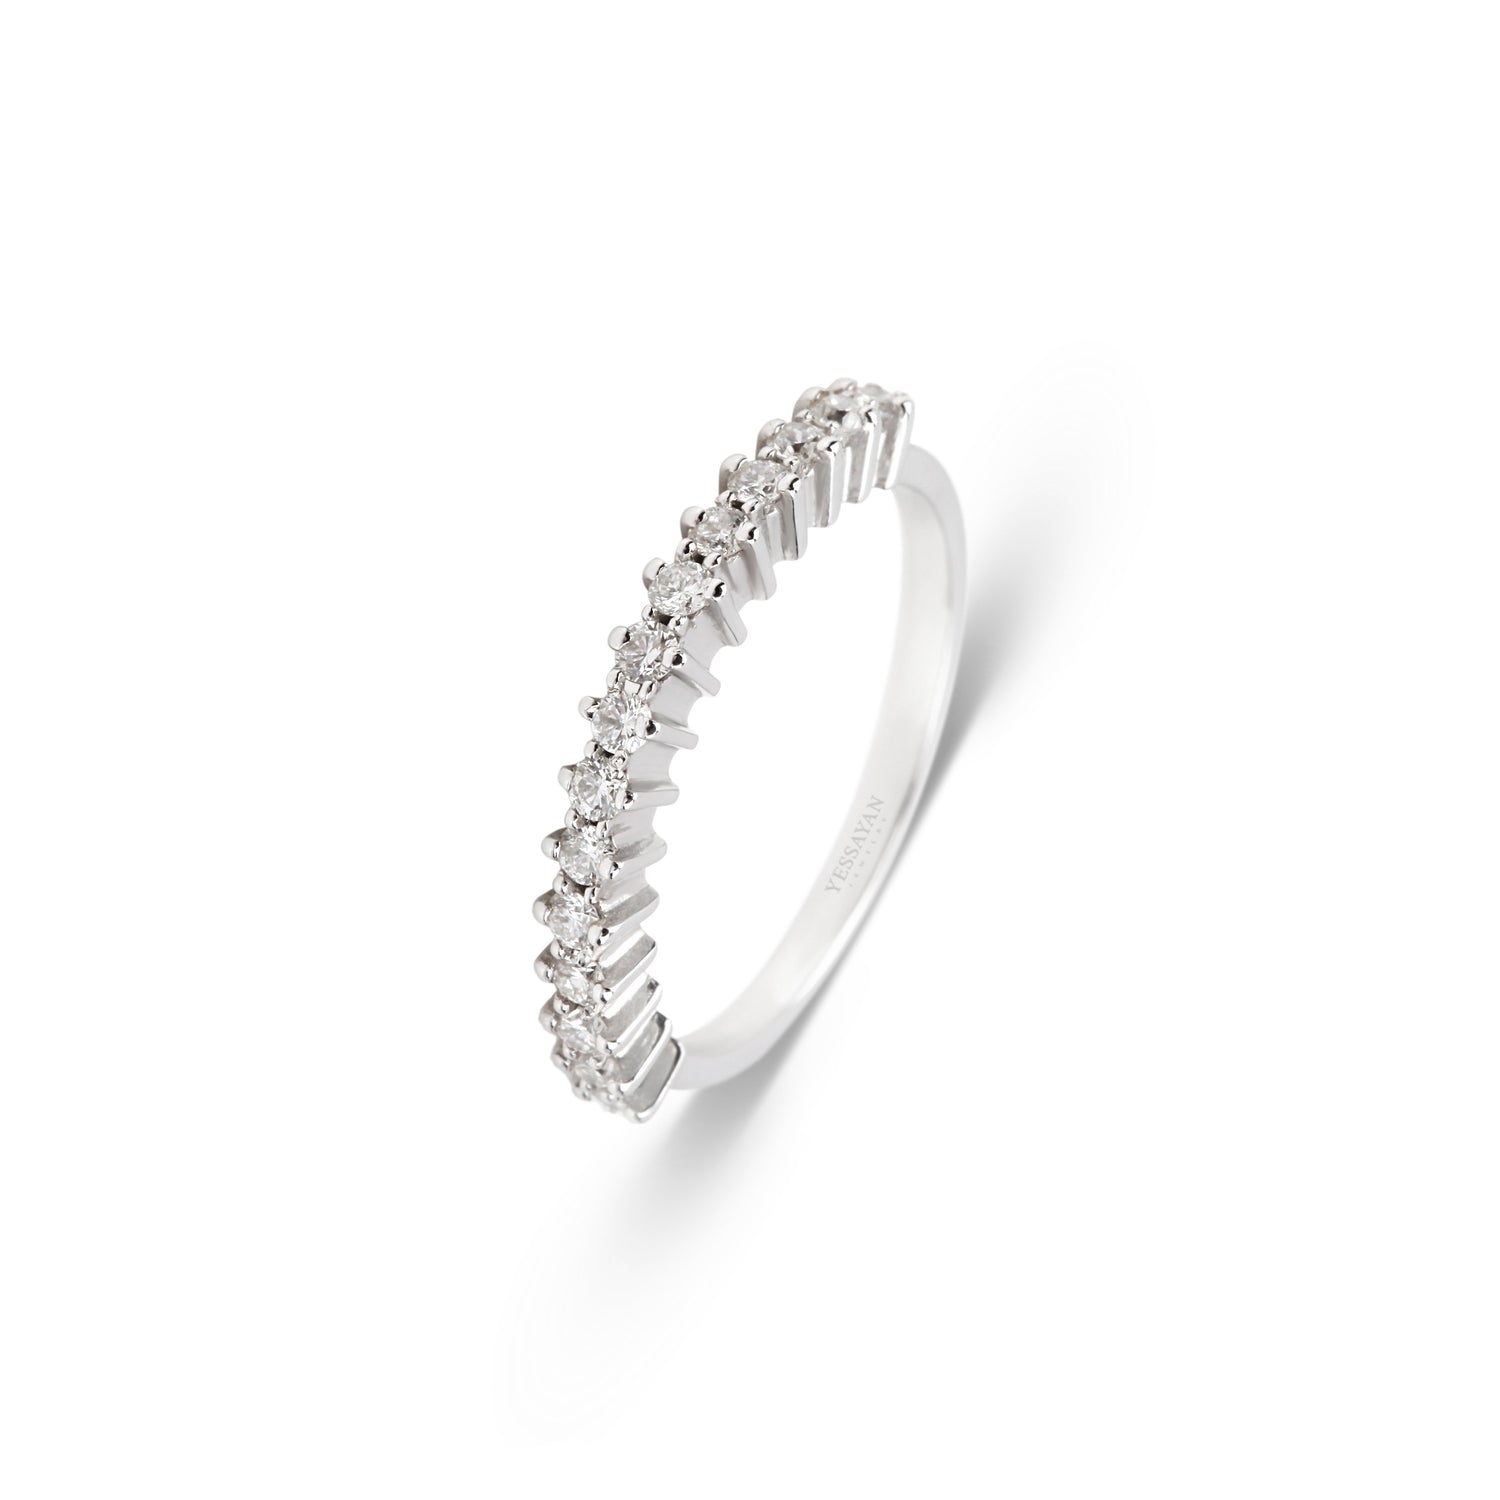 Half Diamond Ring Band | Online jewelry | Solitaire ring 